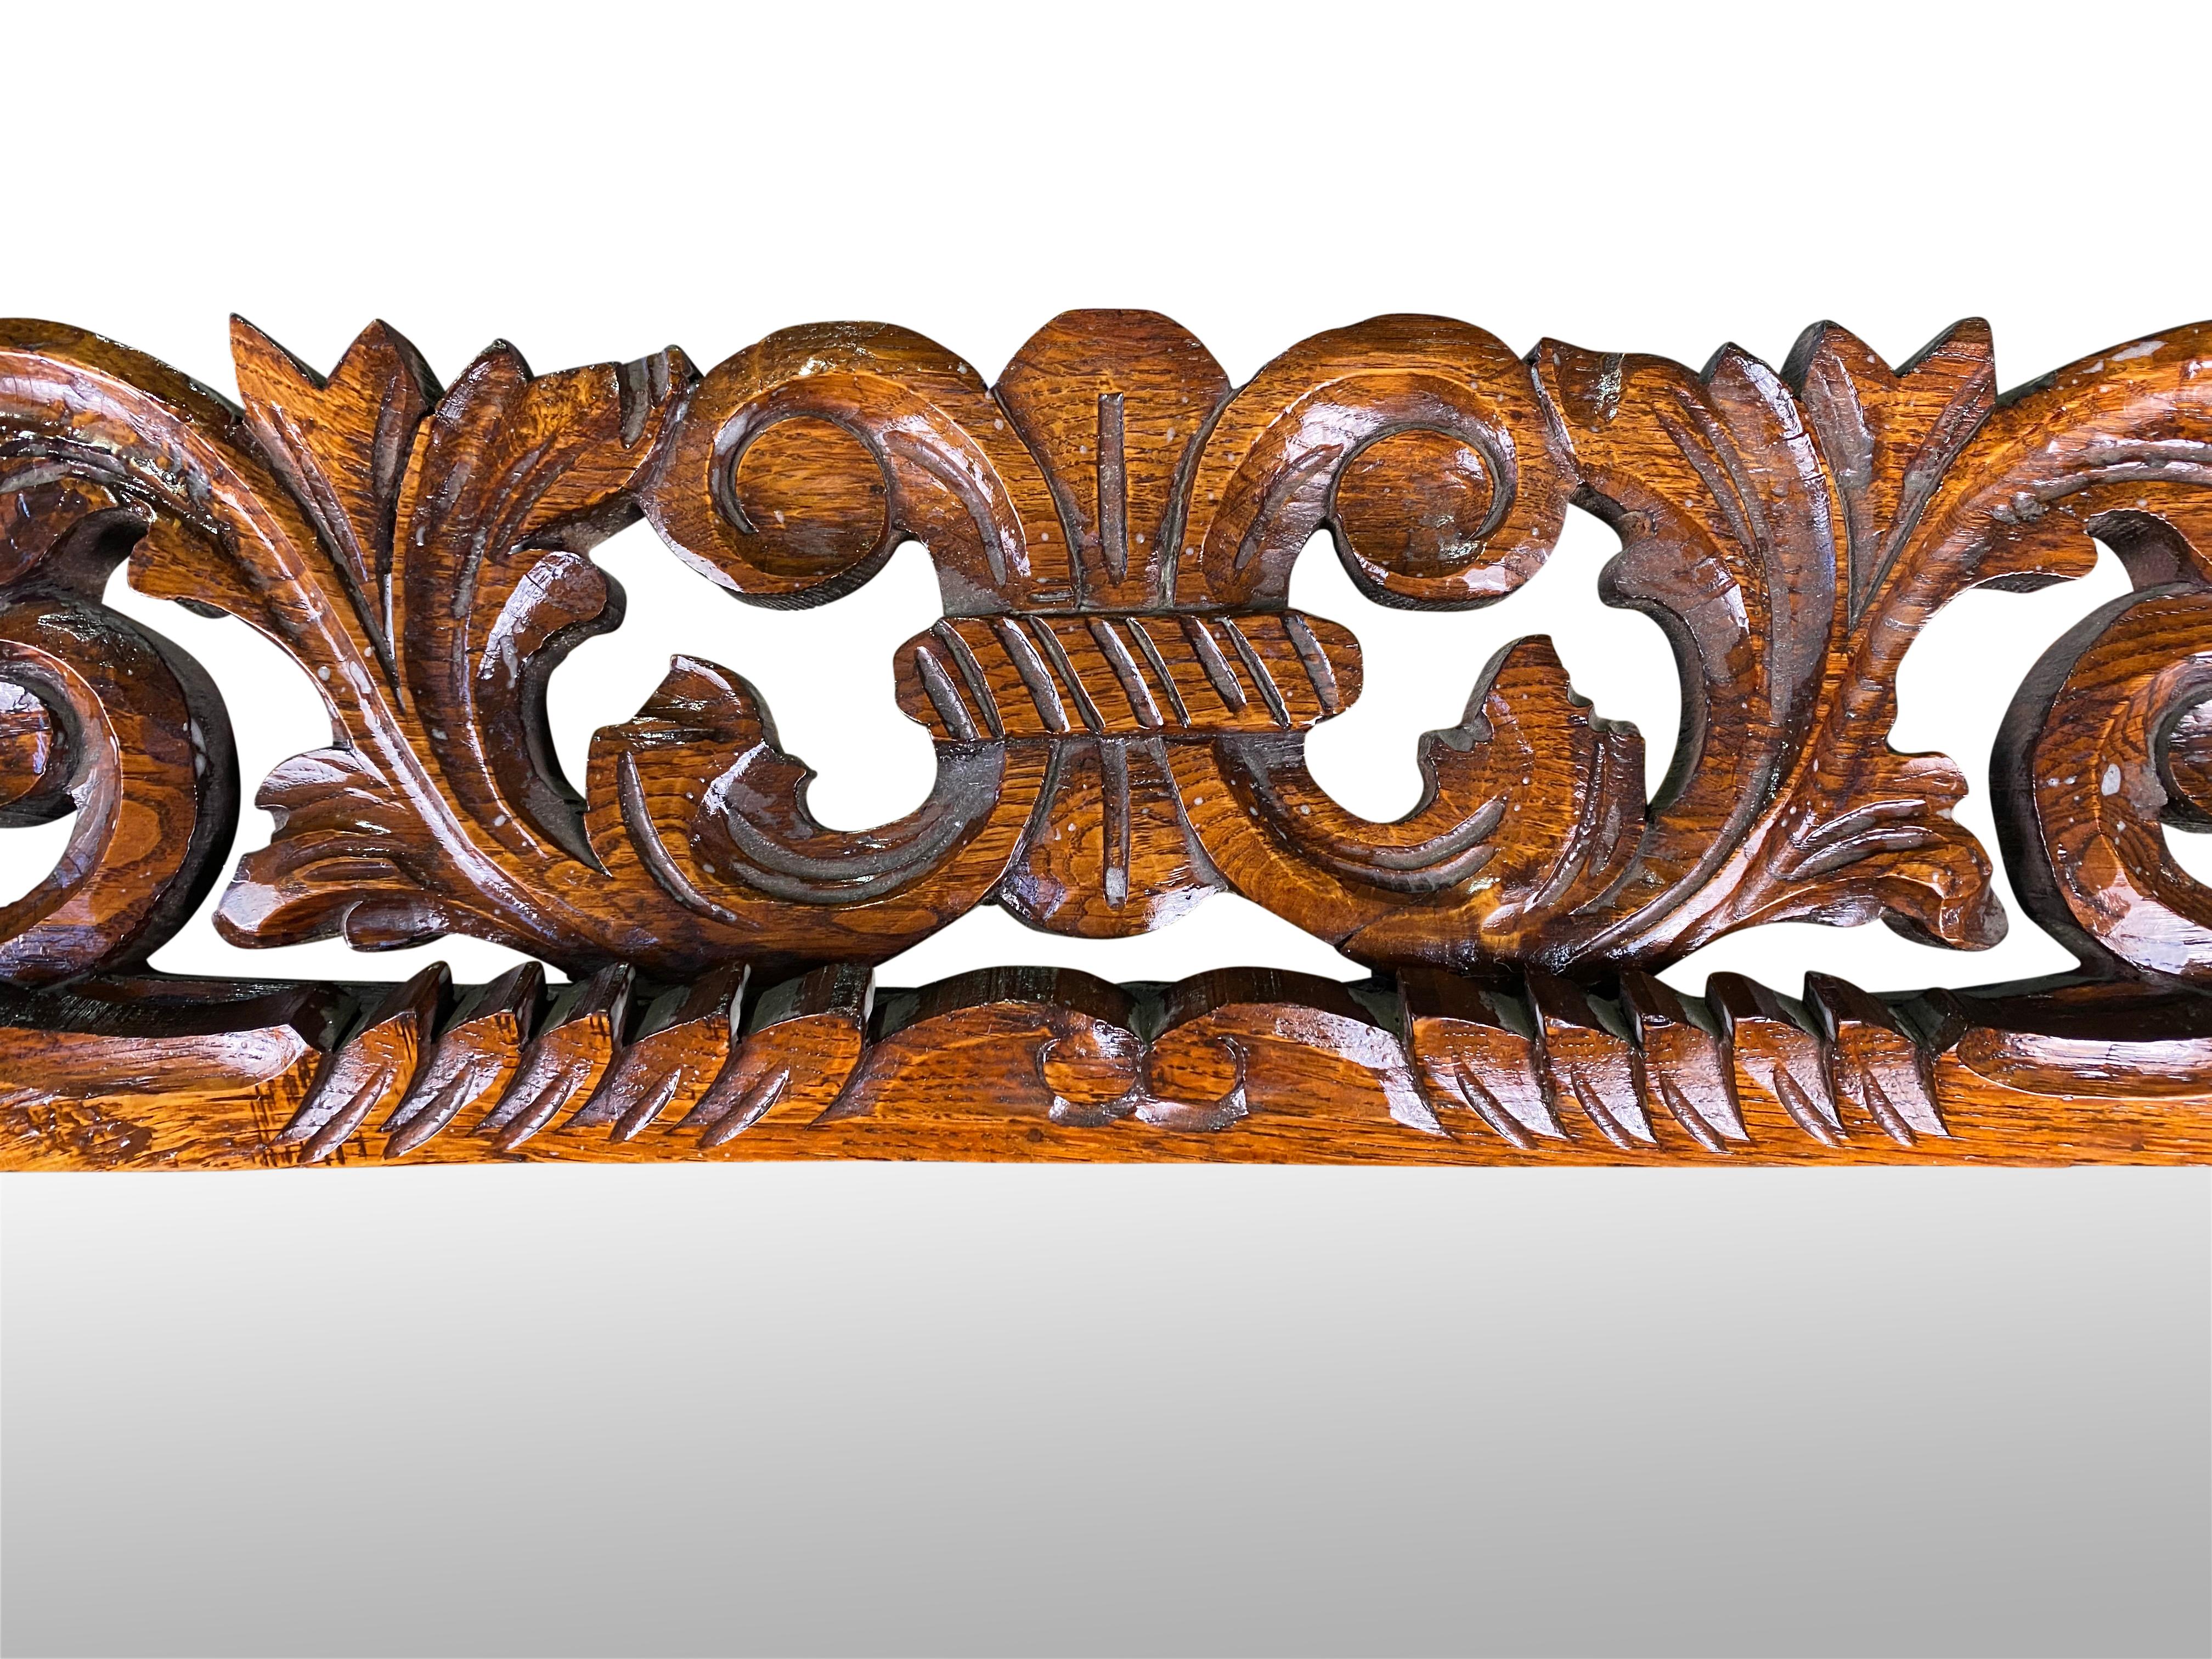 Woodwork Mahogany Carved Mirror, 19th Century For Sale